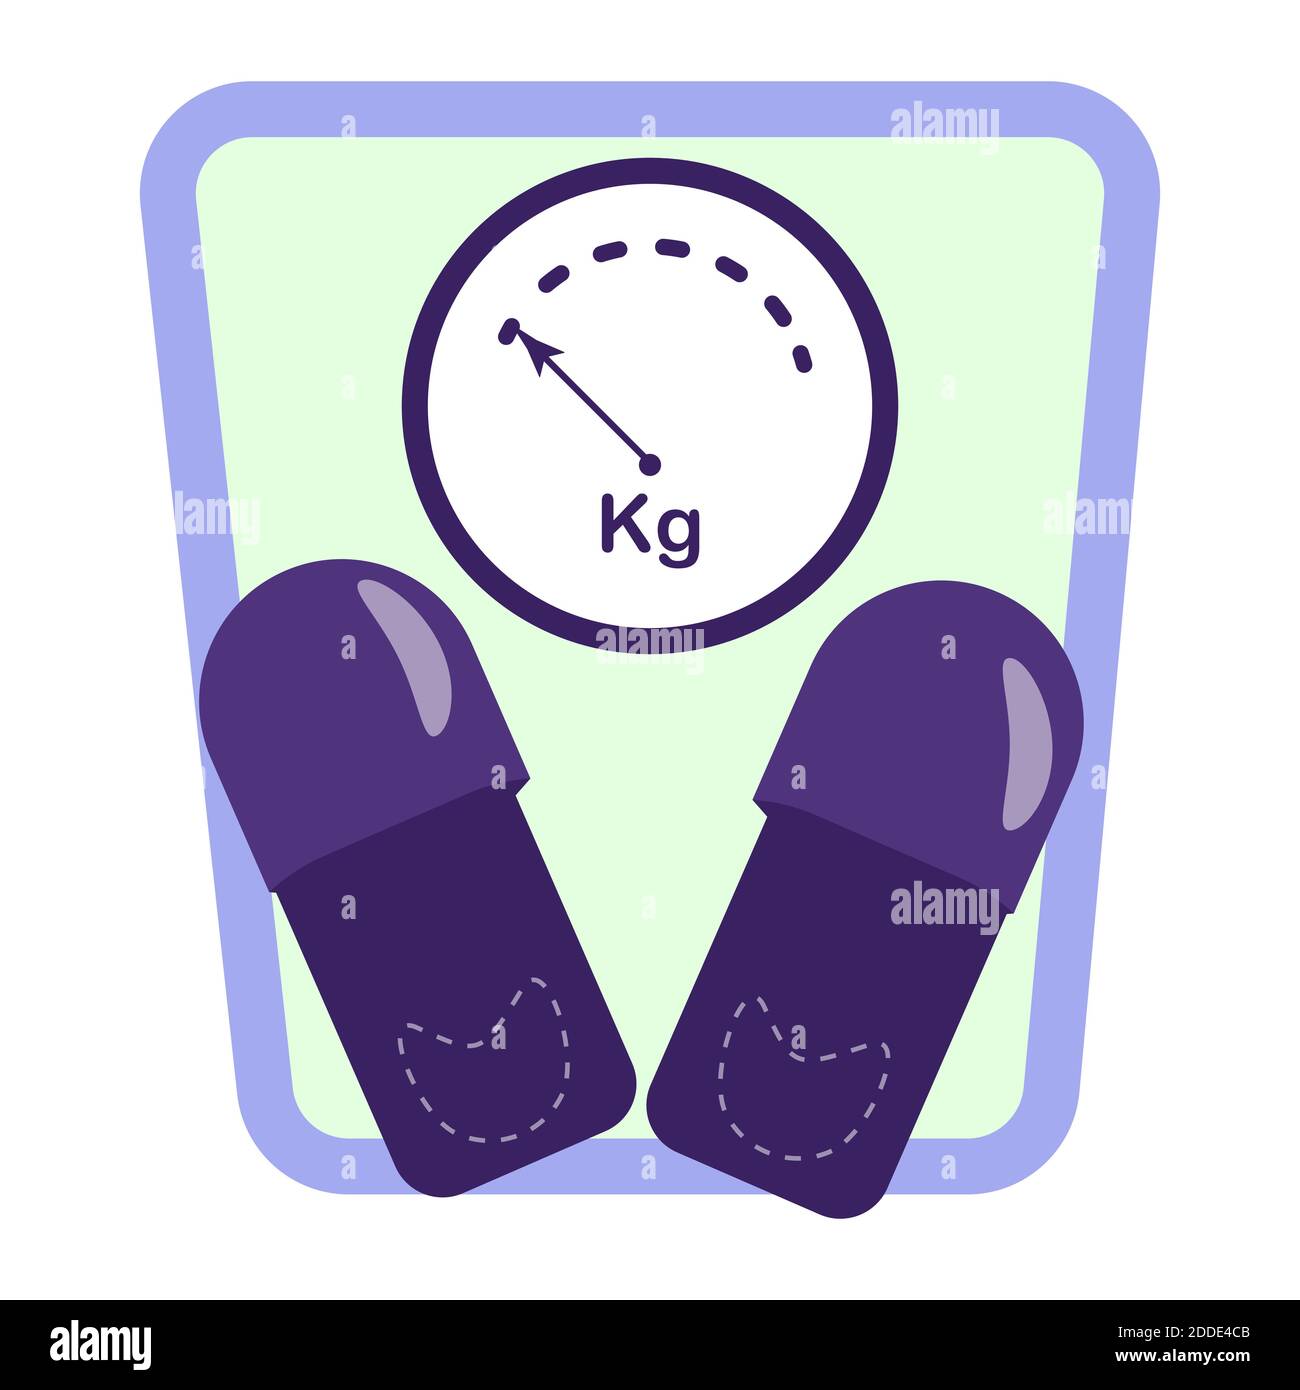 Analog Weight Scale Isolated: Weight Loss Concept Stock Vector -  Illustration of control, training: 284386648